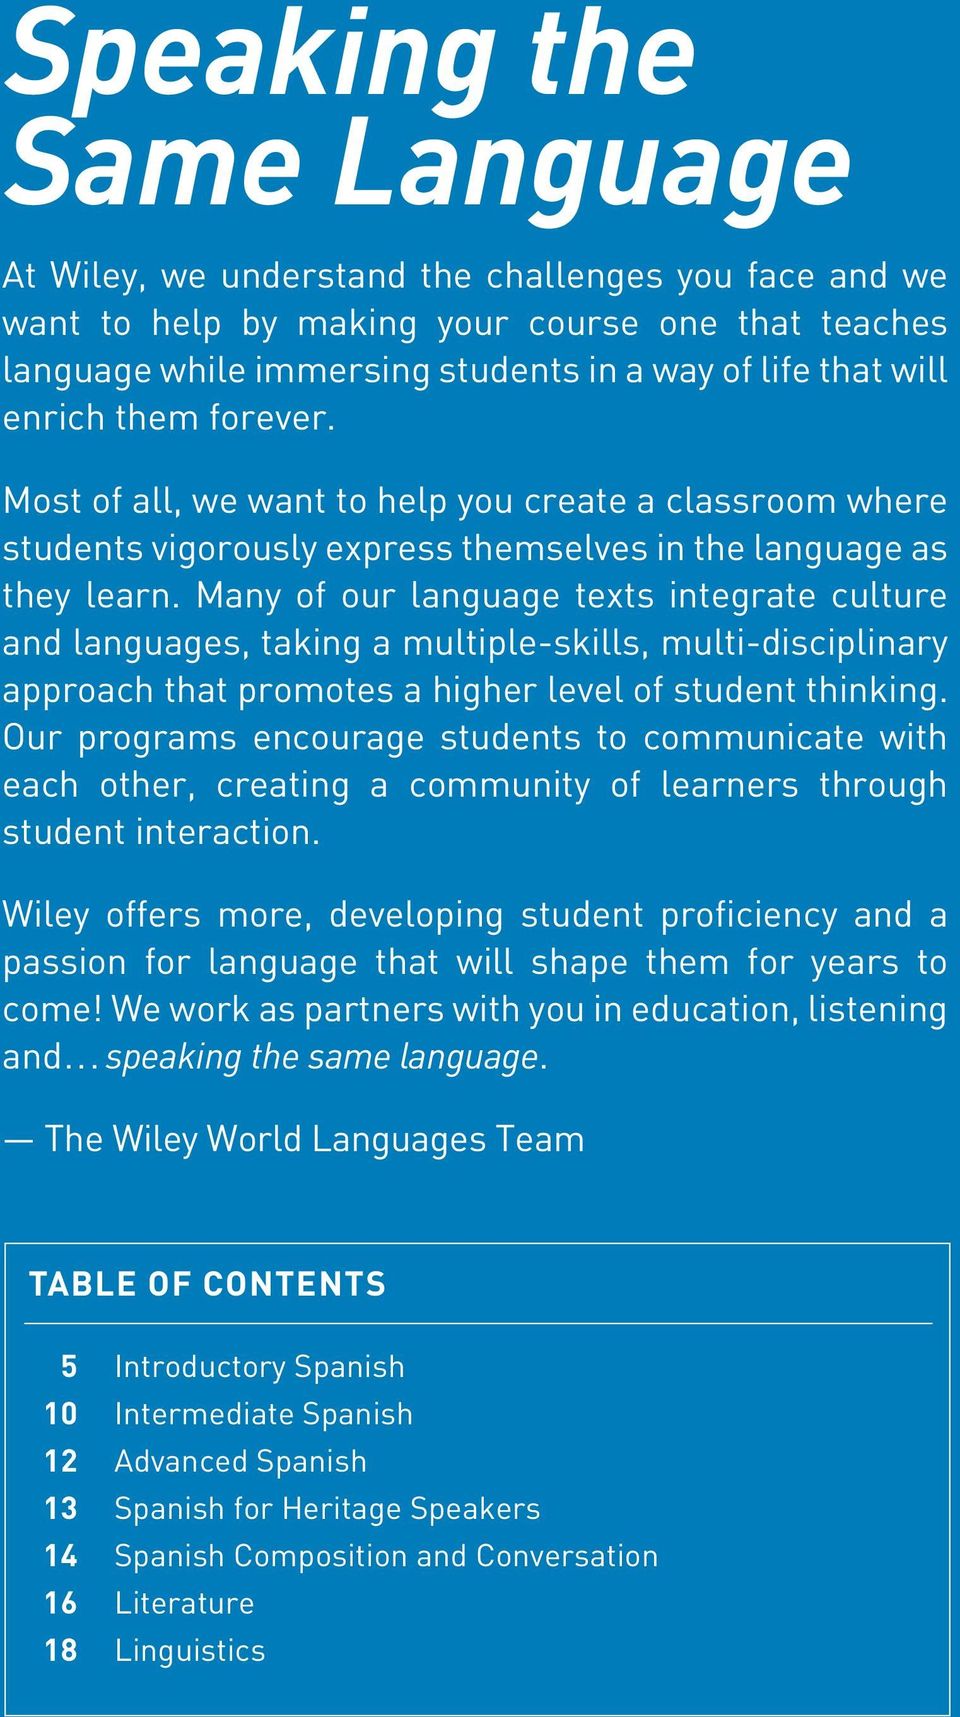 Many of our language texts integrate culture and languages, taking a multiple-skills, multi-disciplinary approach that promotes a higher level of student thinking.